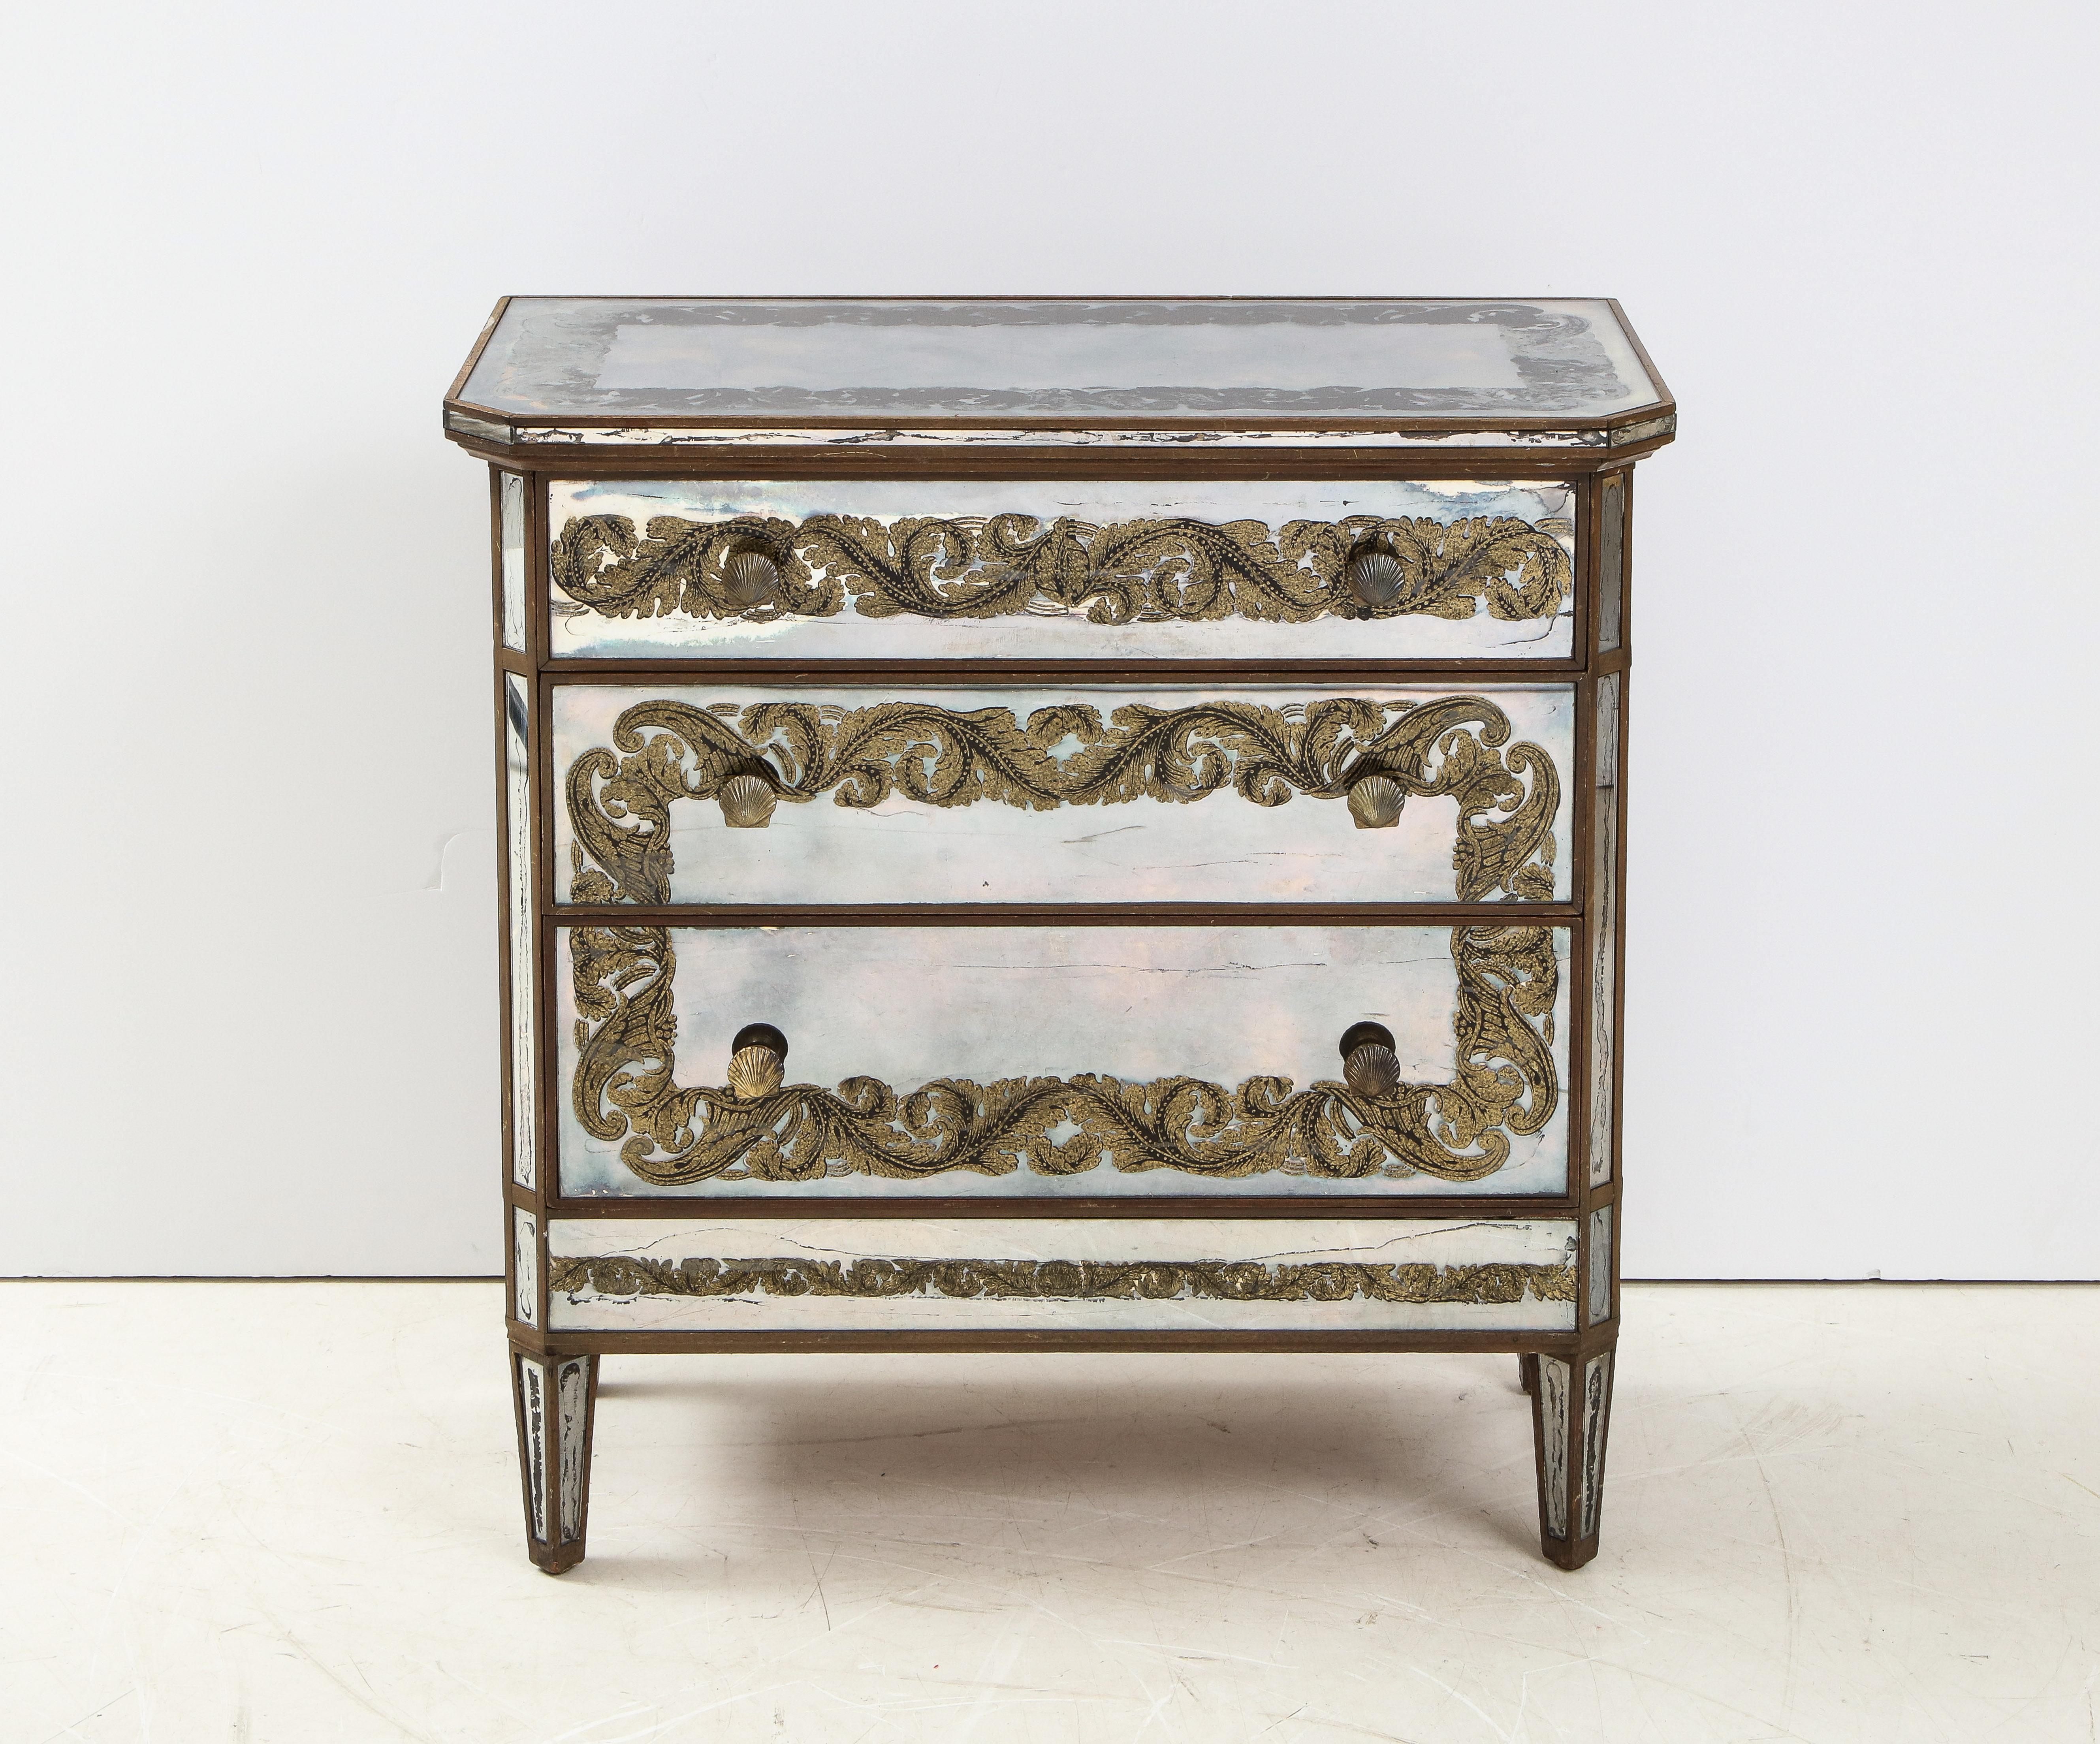 An elegant Maison Jansen eglomisé three draw chest with gold gilded decoration of cornucopia shells with floral bouquets and scrolls of acanthus leaves on mirrored panels. A gilded trim surrounds the mirrored panels and two shell form pulls are on